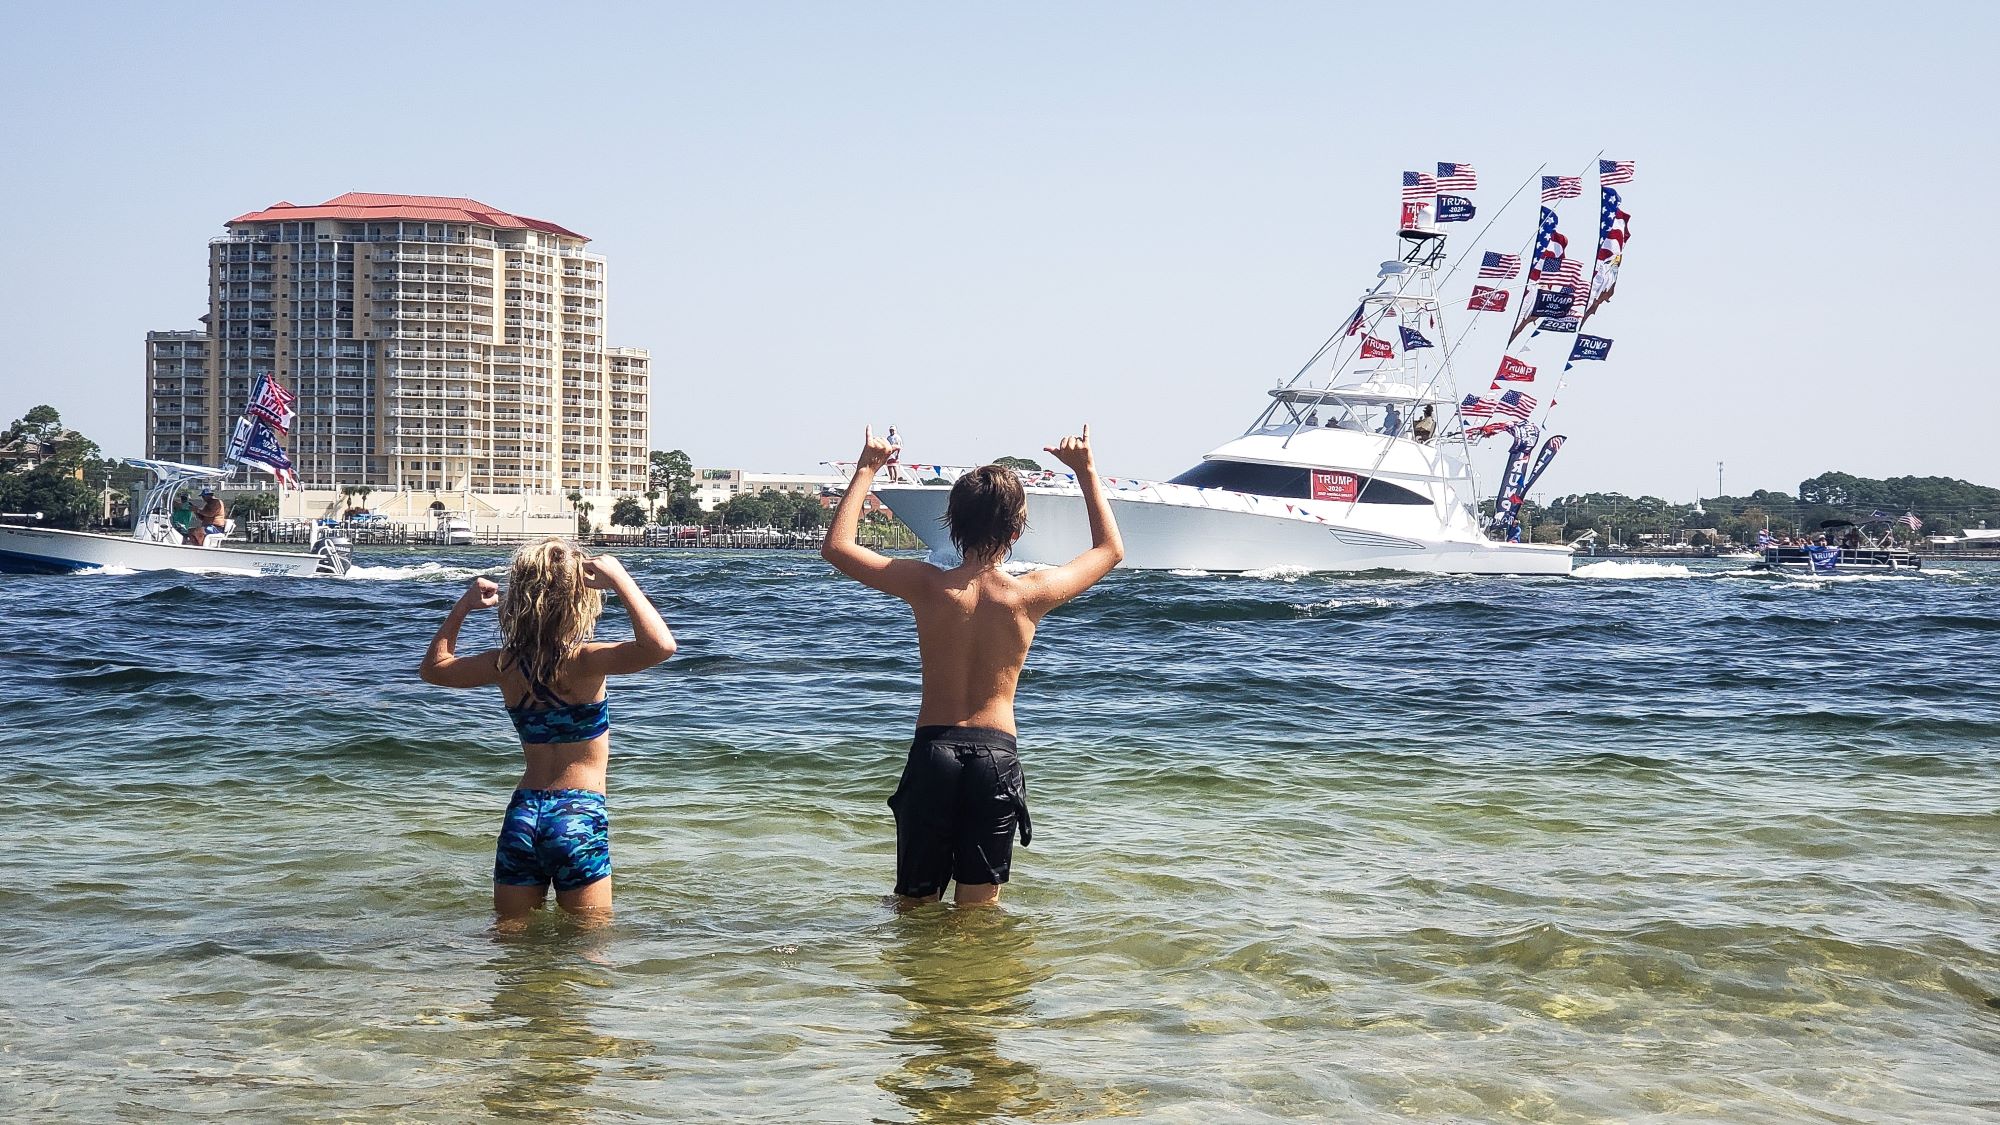 kids in the water during spring time in fort walton beach with boats and a building in the background